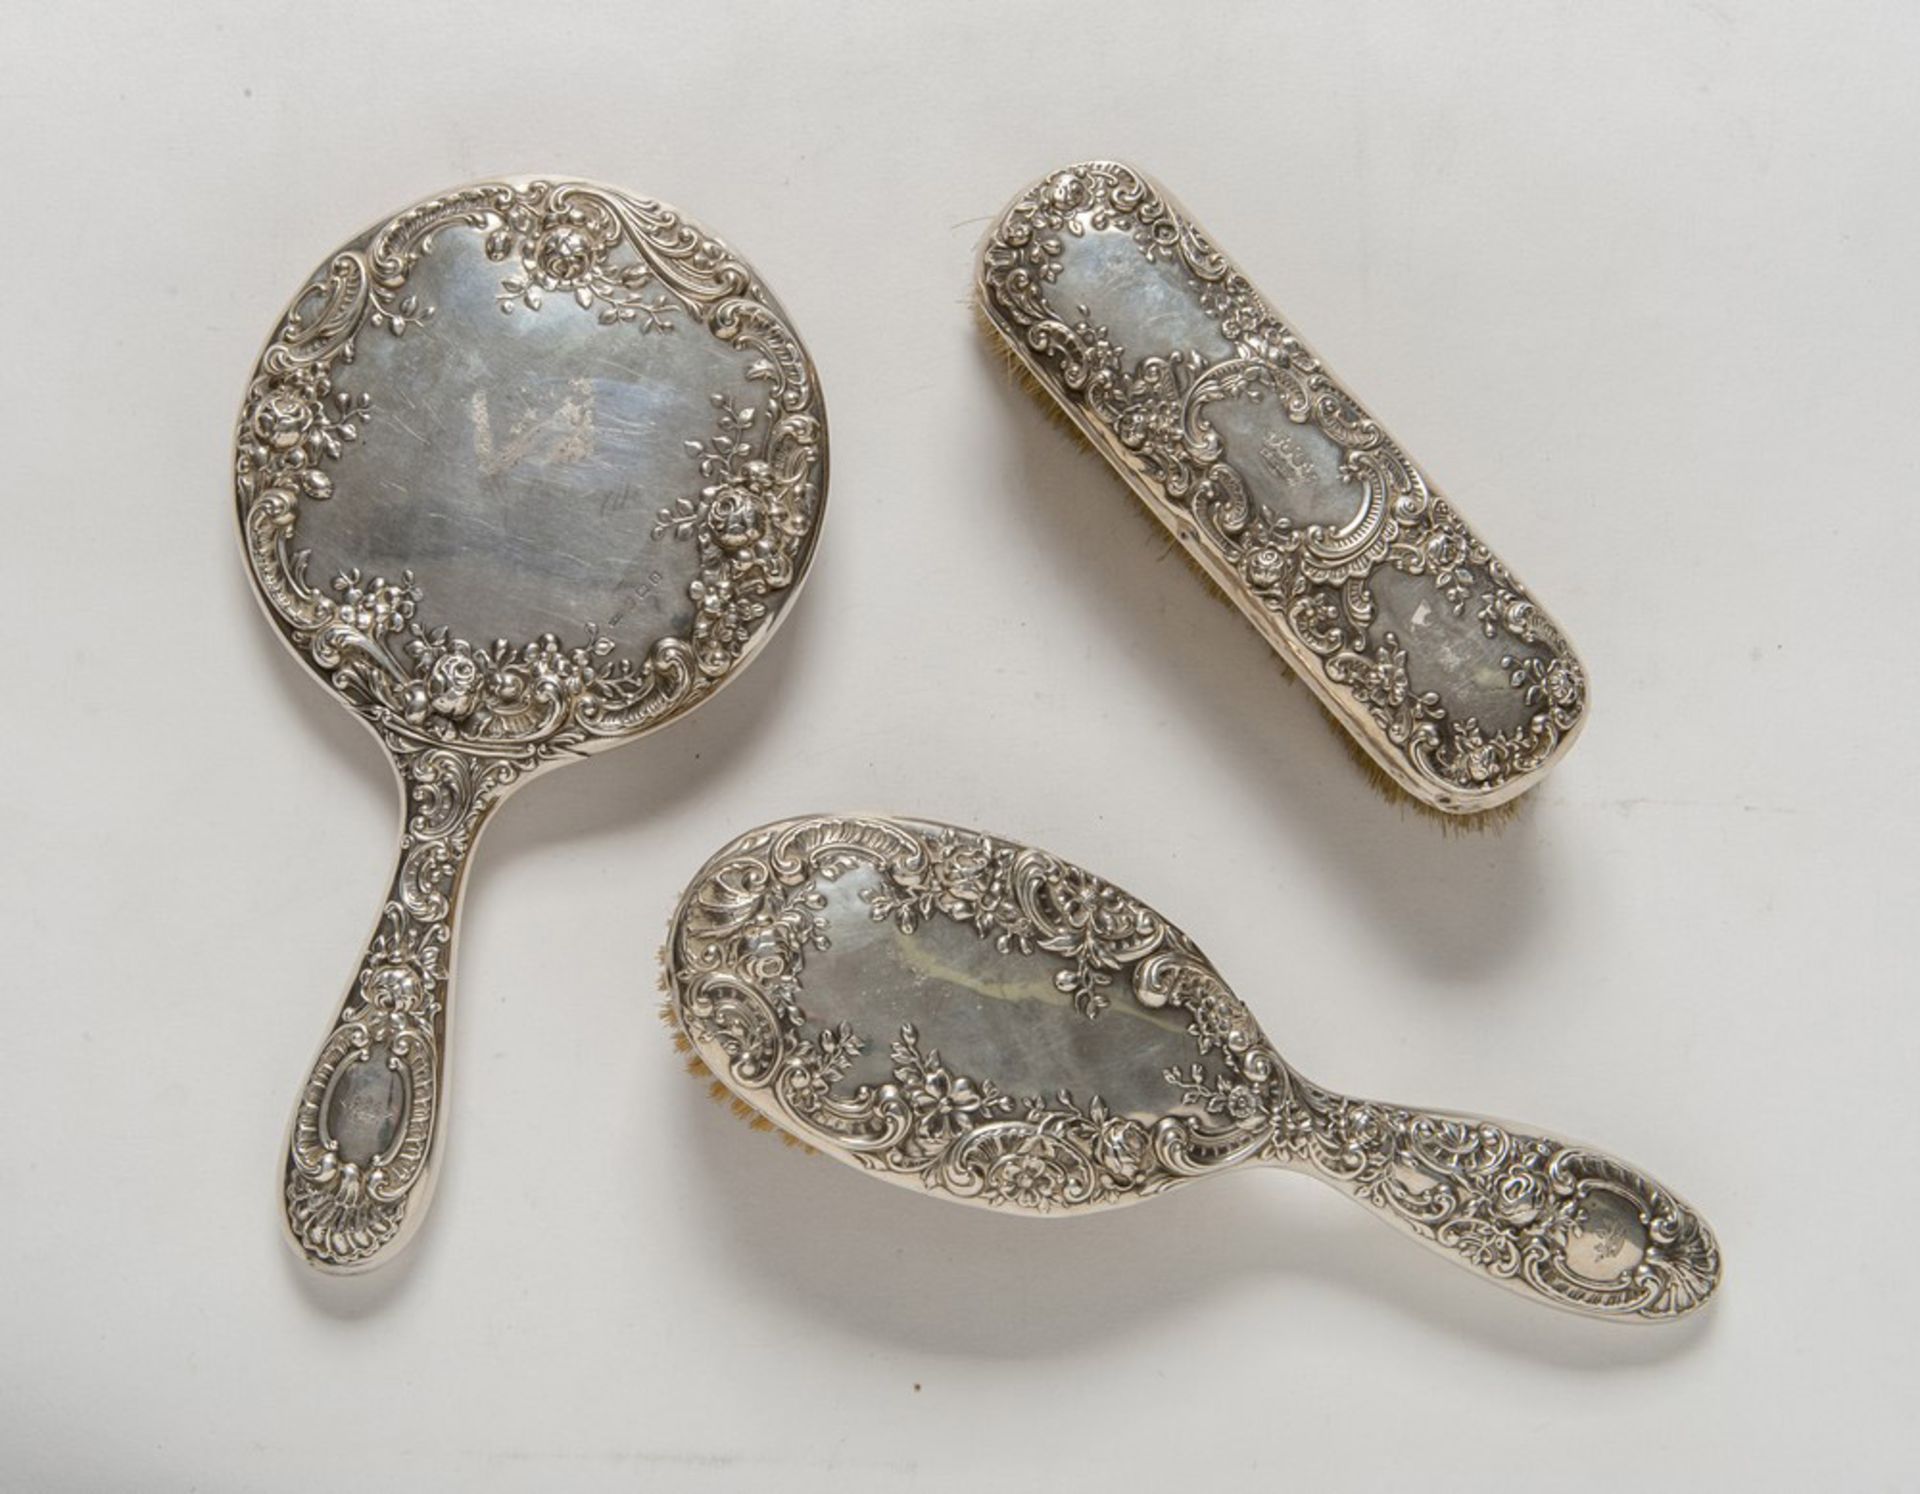 SILVER TOILET SET, PUNCH GORHAM BIRMINGHAM 1912 with rich chisels to vegetable motifs, centered by